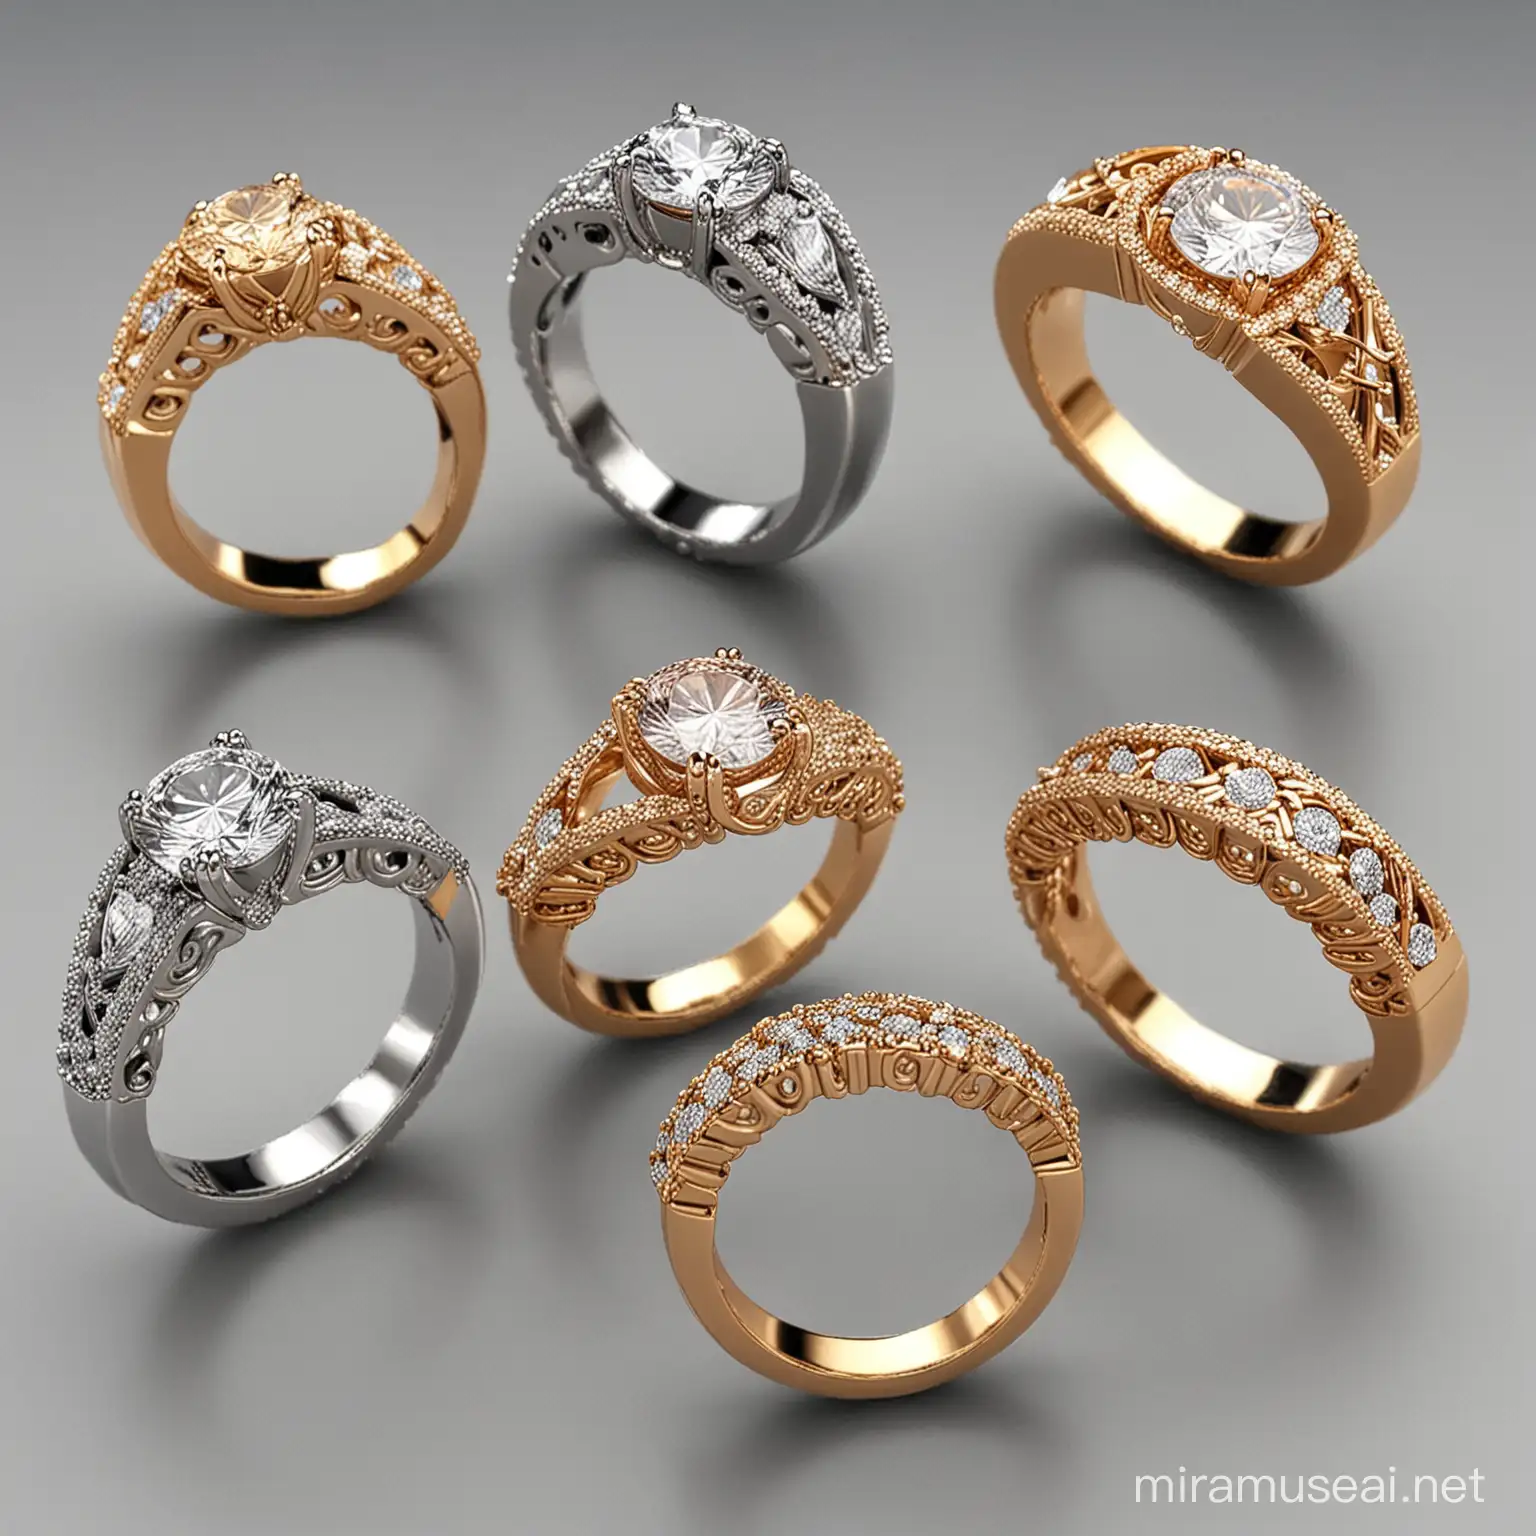 create  5 premium different ring designs for women . Make each ring unique and appealing 